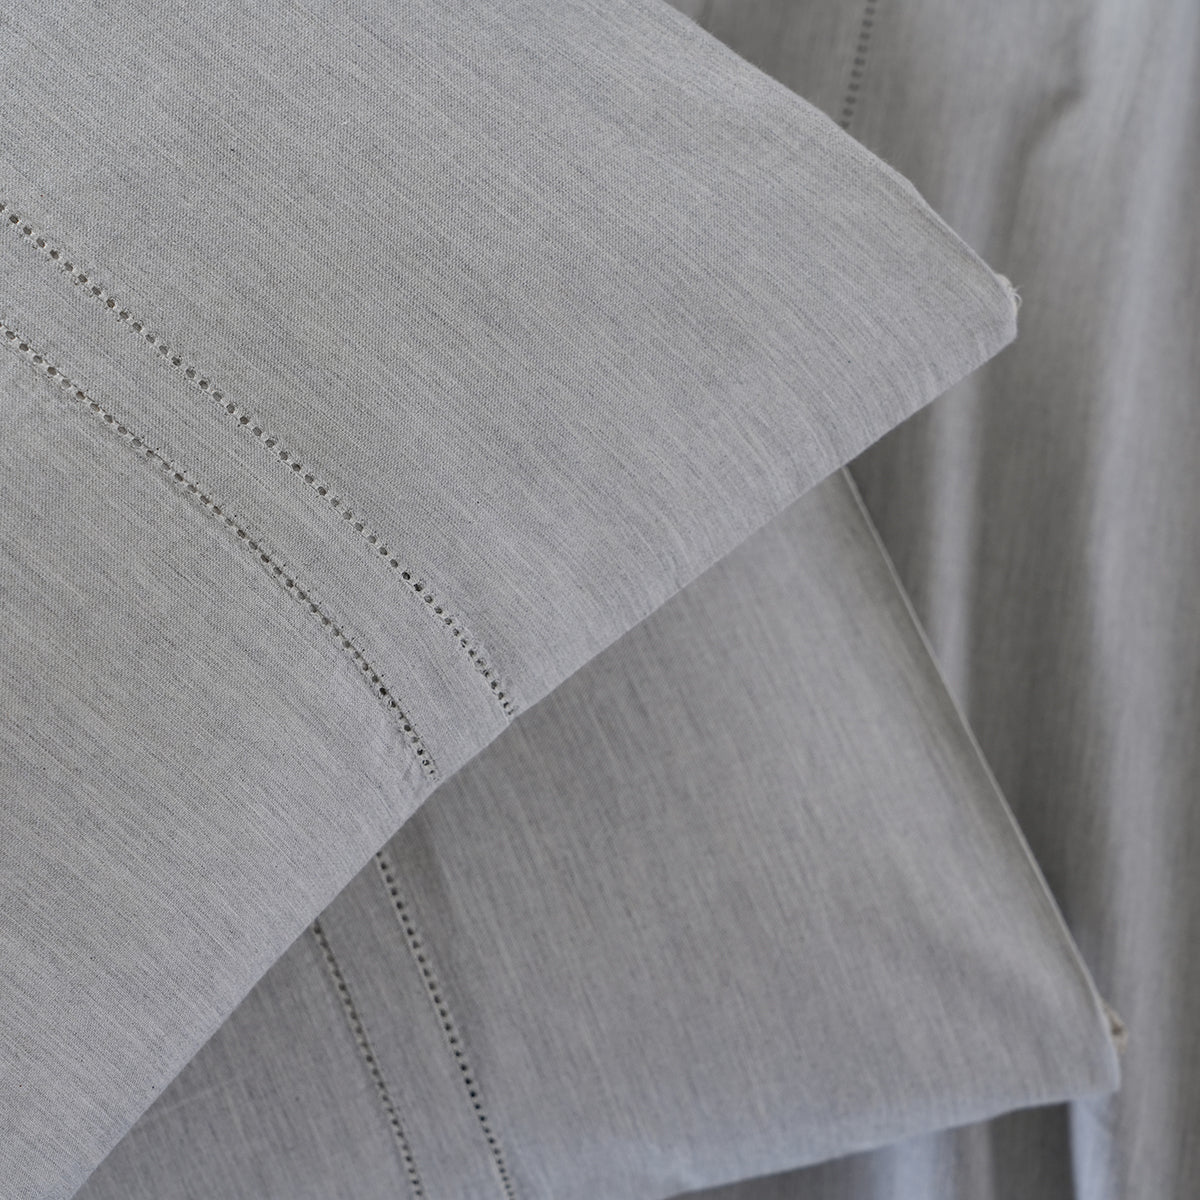 Emmie Made With Egyptian Cotton Ultra Soft Grey Bed Sheet